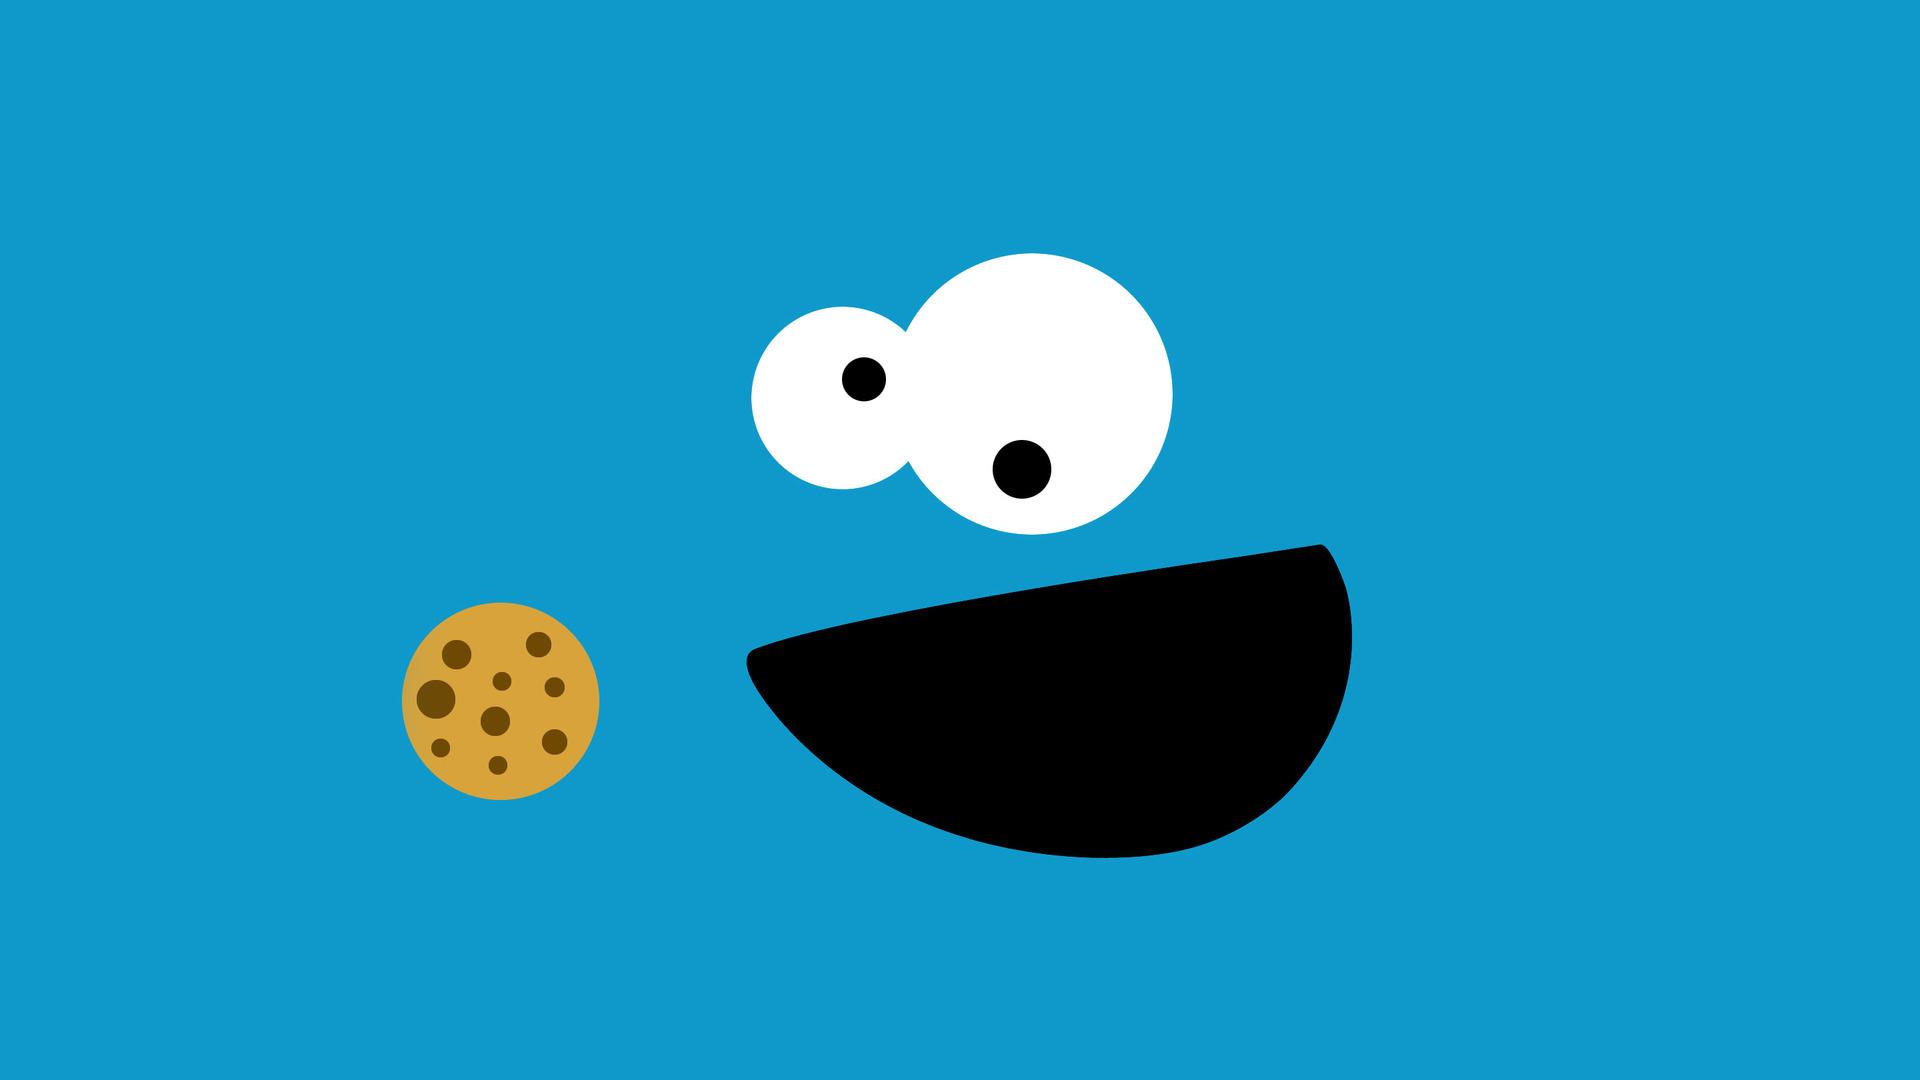 Cookie Monster Background for Computer. Computer Wallpaper, Beautiful Computer Wallpaper and Cute Computer Wallpaper